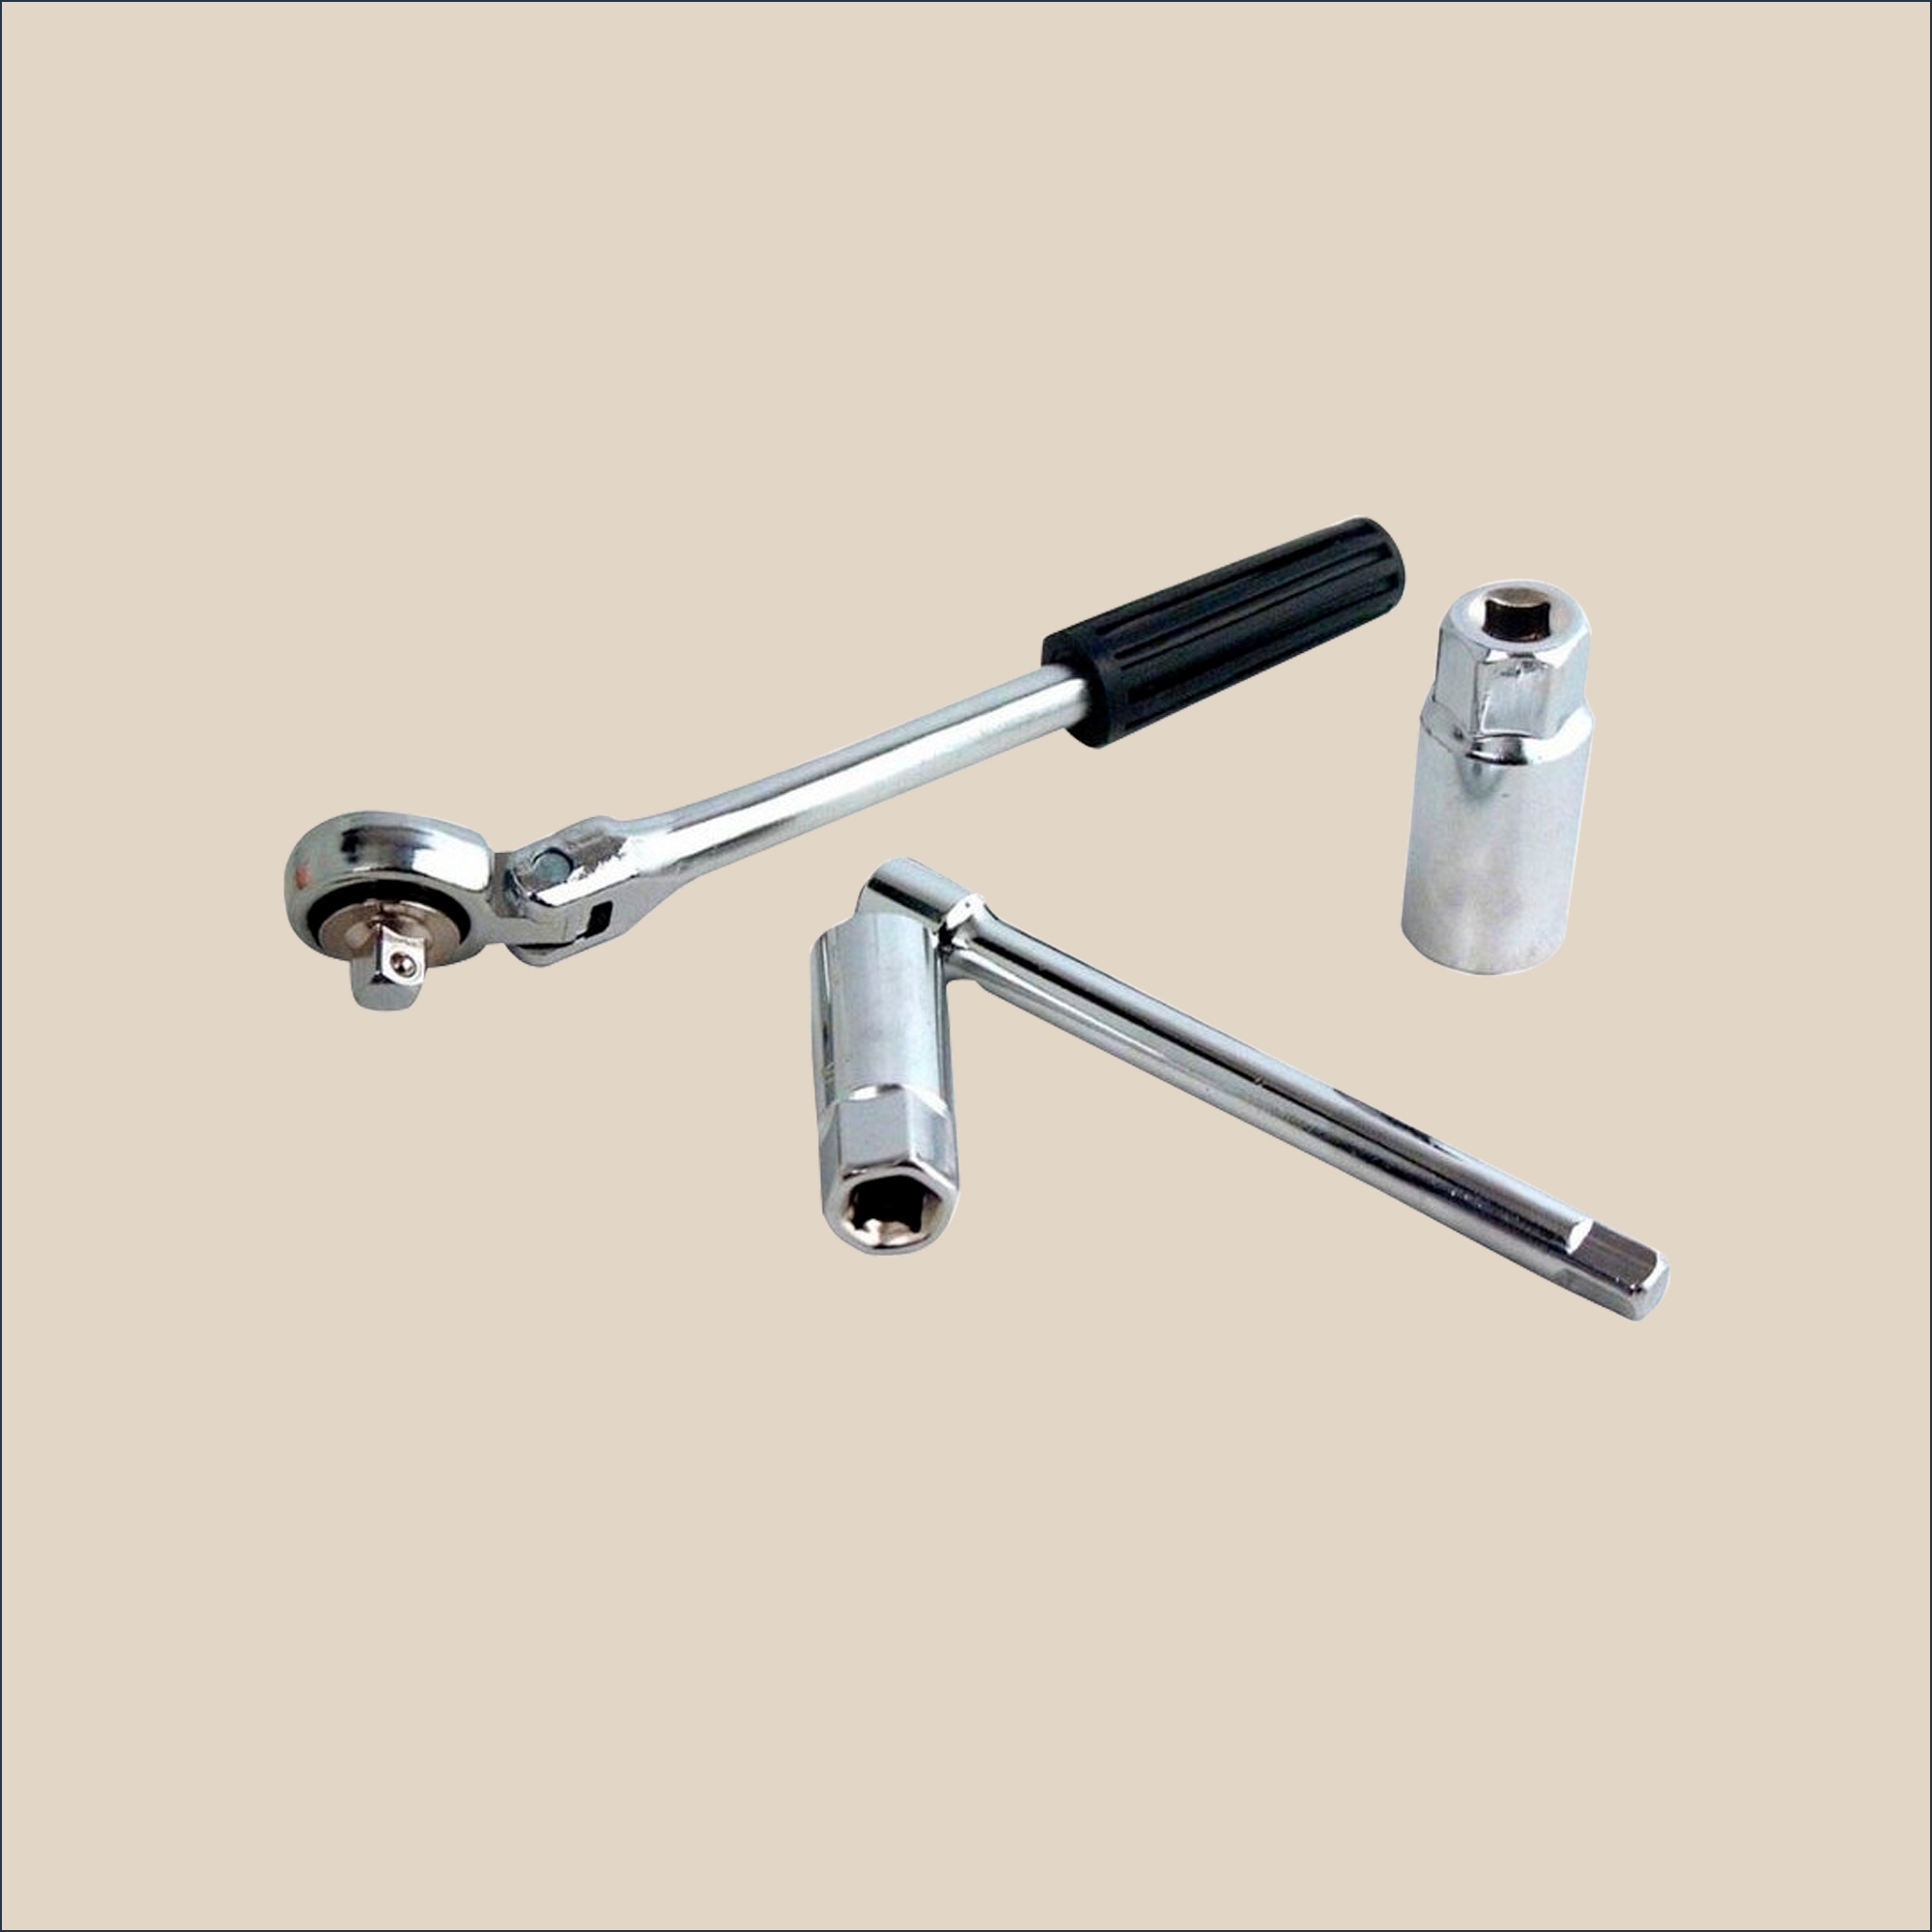 Accessoire auto : CLE BOUGIE CARDAN 16MM, ISOLEE, CHROMEE pas cher 21016431